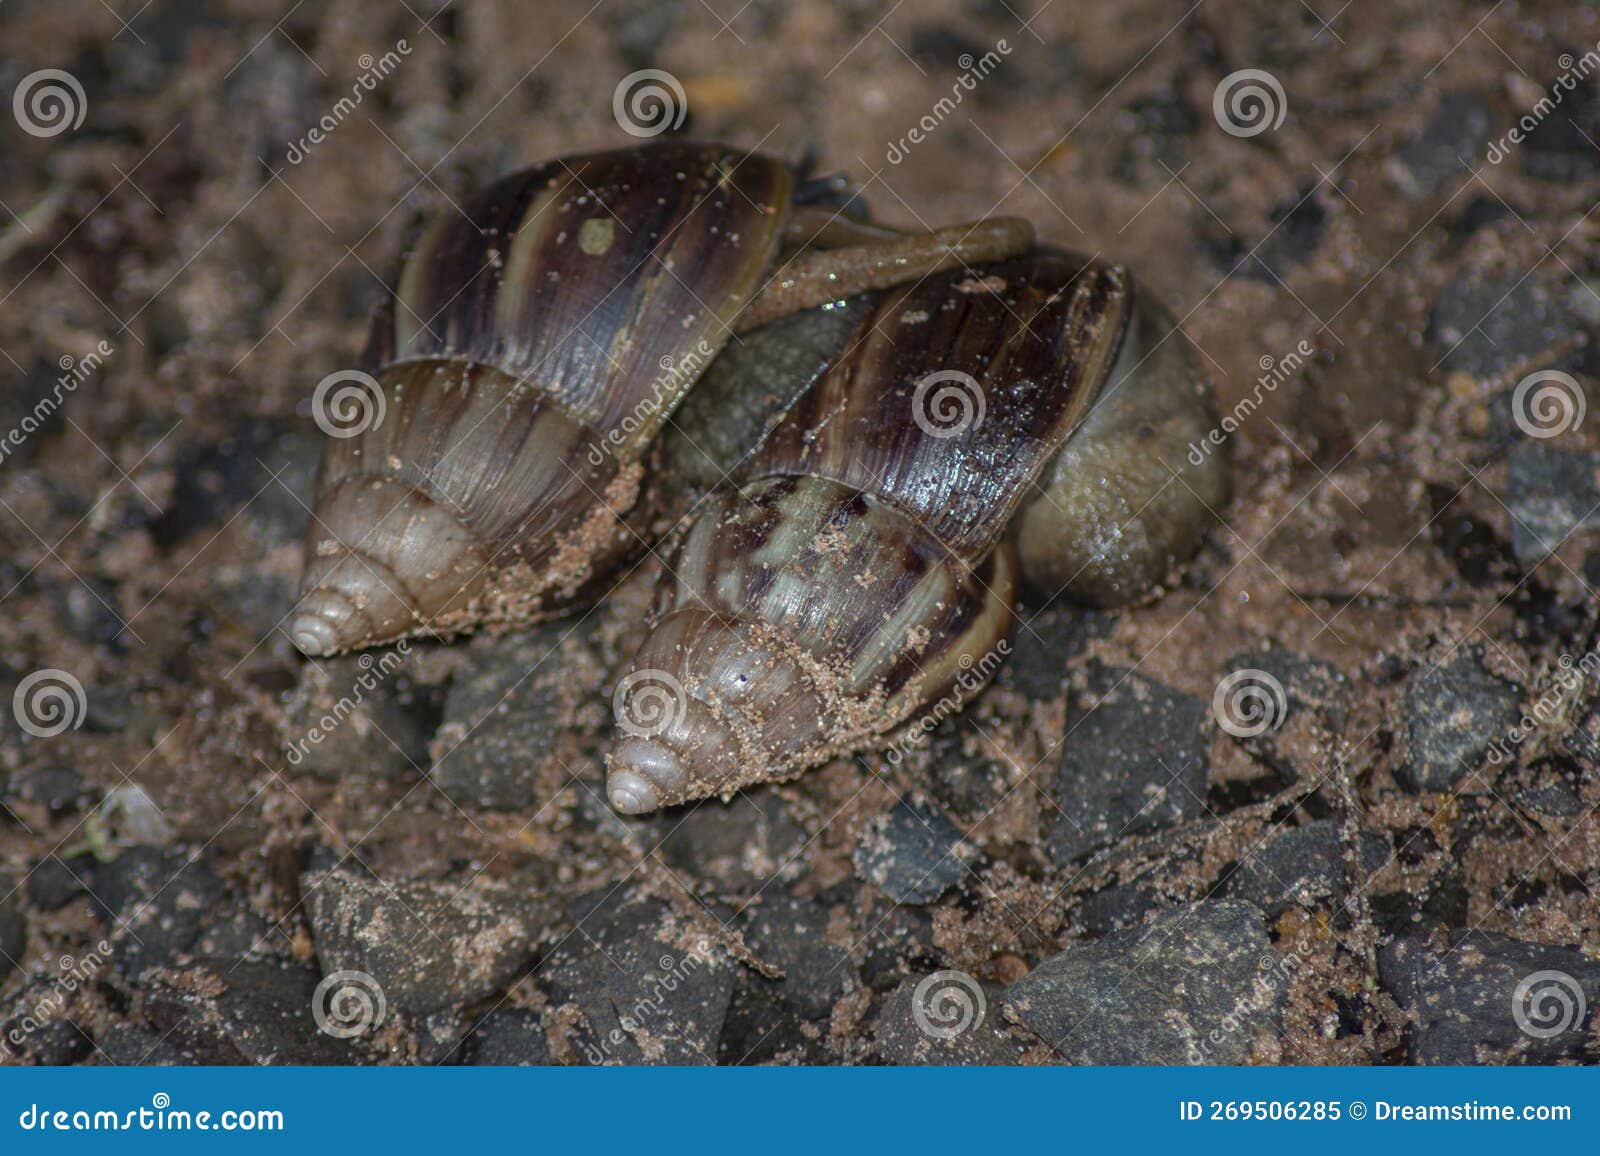 giant african snail (achatina fulica) mating. intersexual species